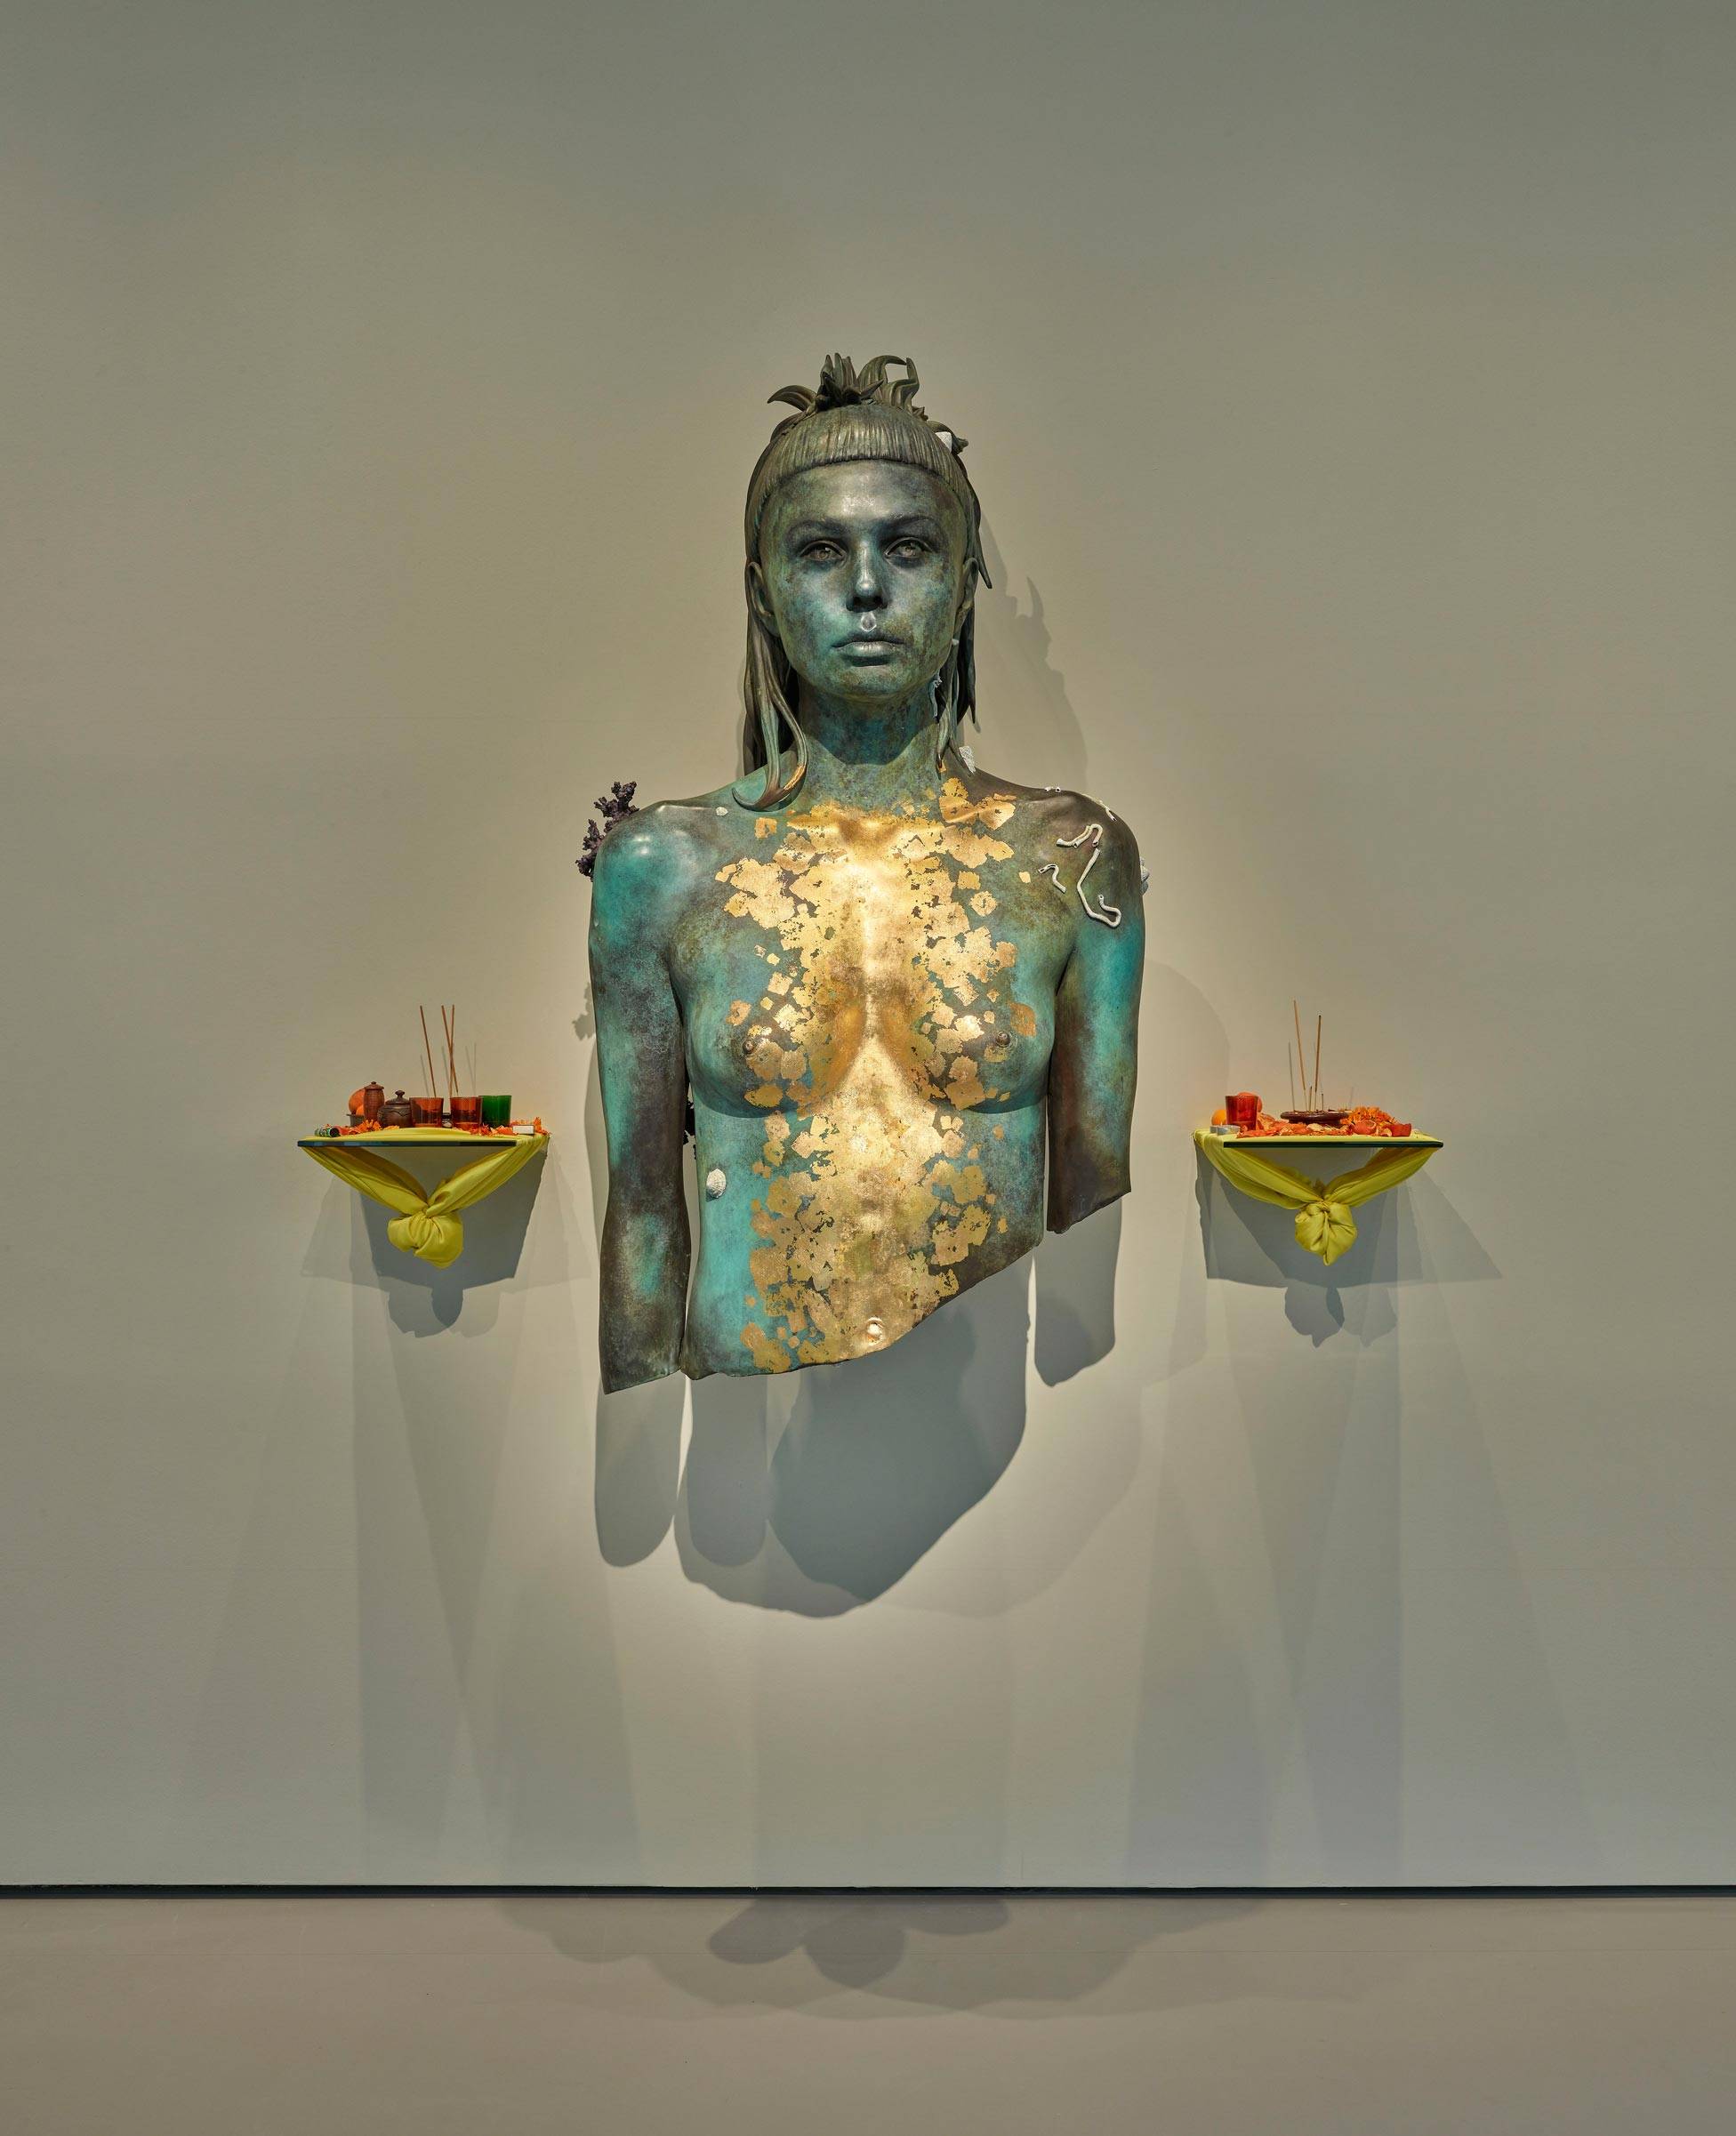 Room 11:
Damien Hirst, Aspect of Katie Ishtar ¥o-landi. Photographed by Prudence Cuming Associates ©
Damien Hirst and Science Ltd. All rights reserved, DACS/SIAE 2017